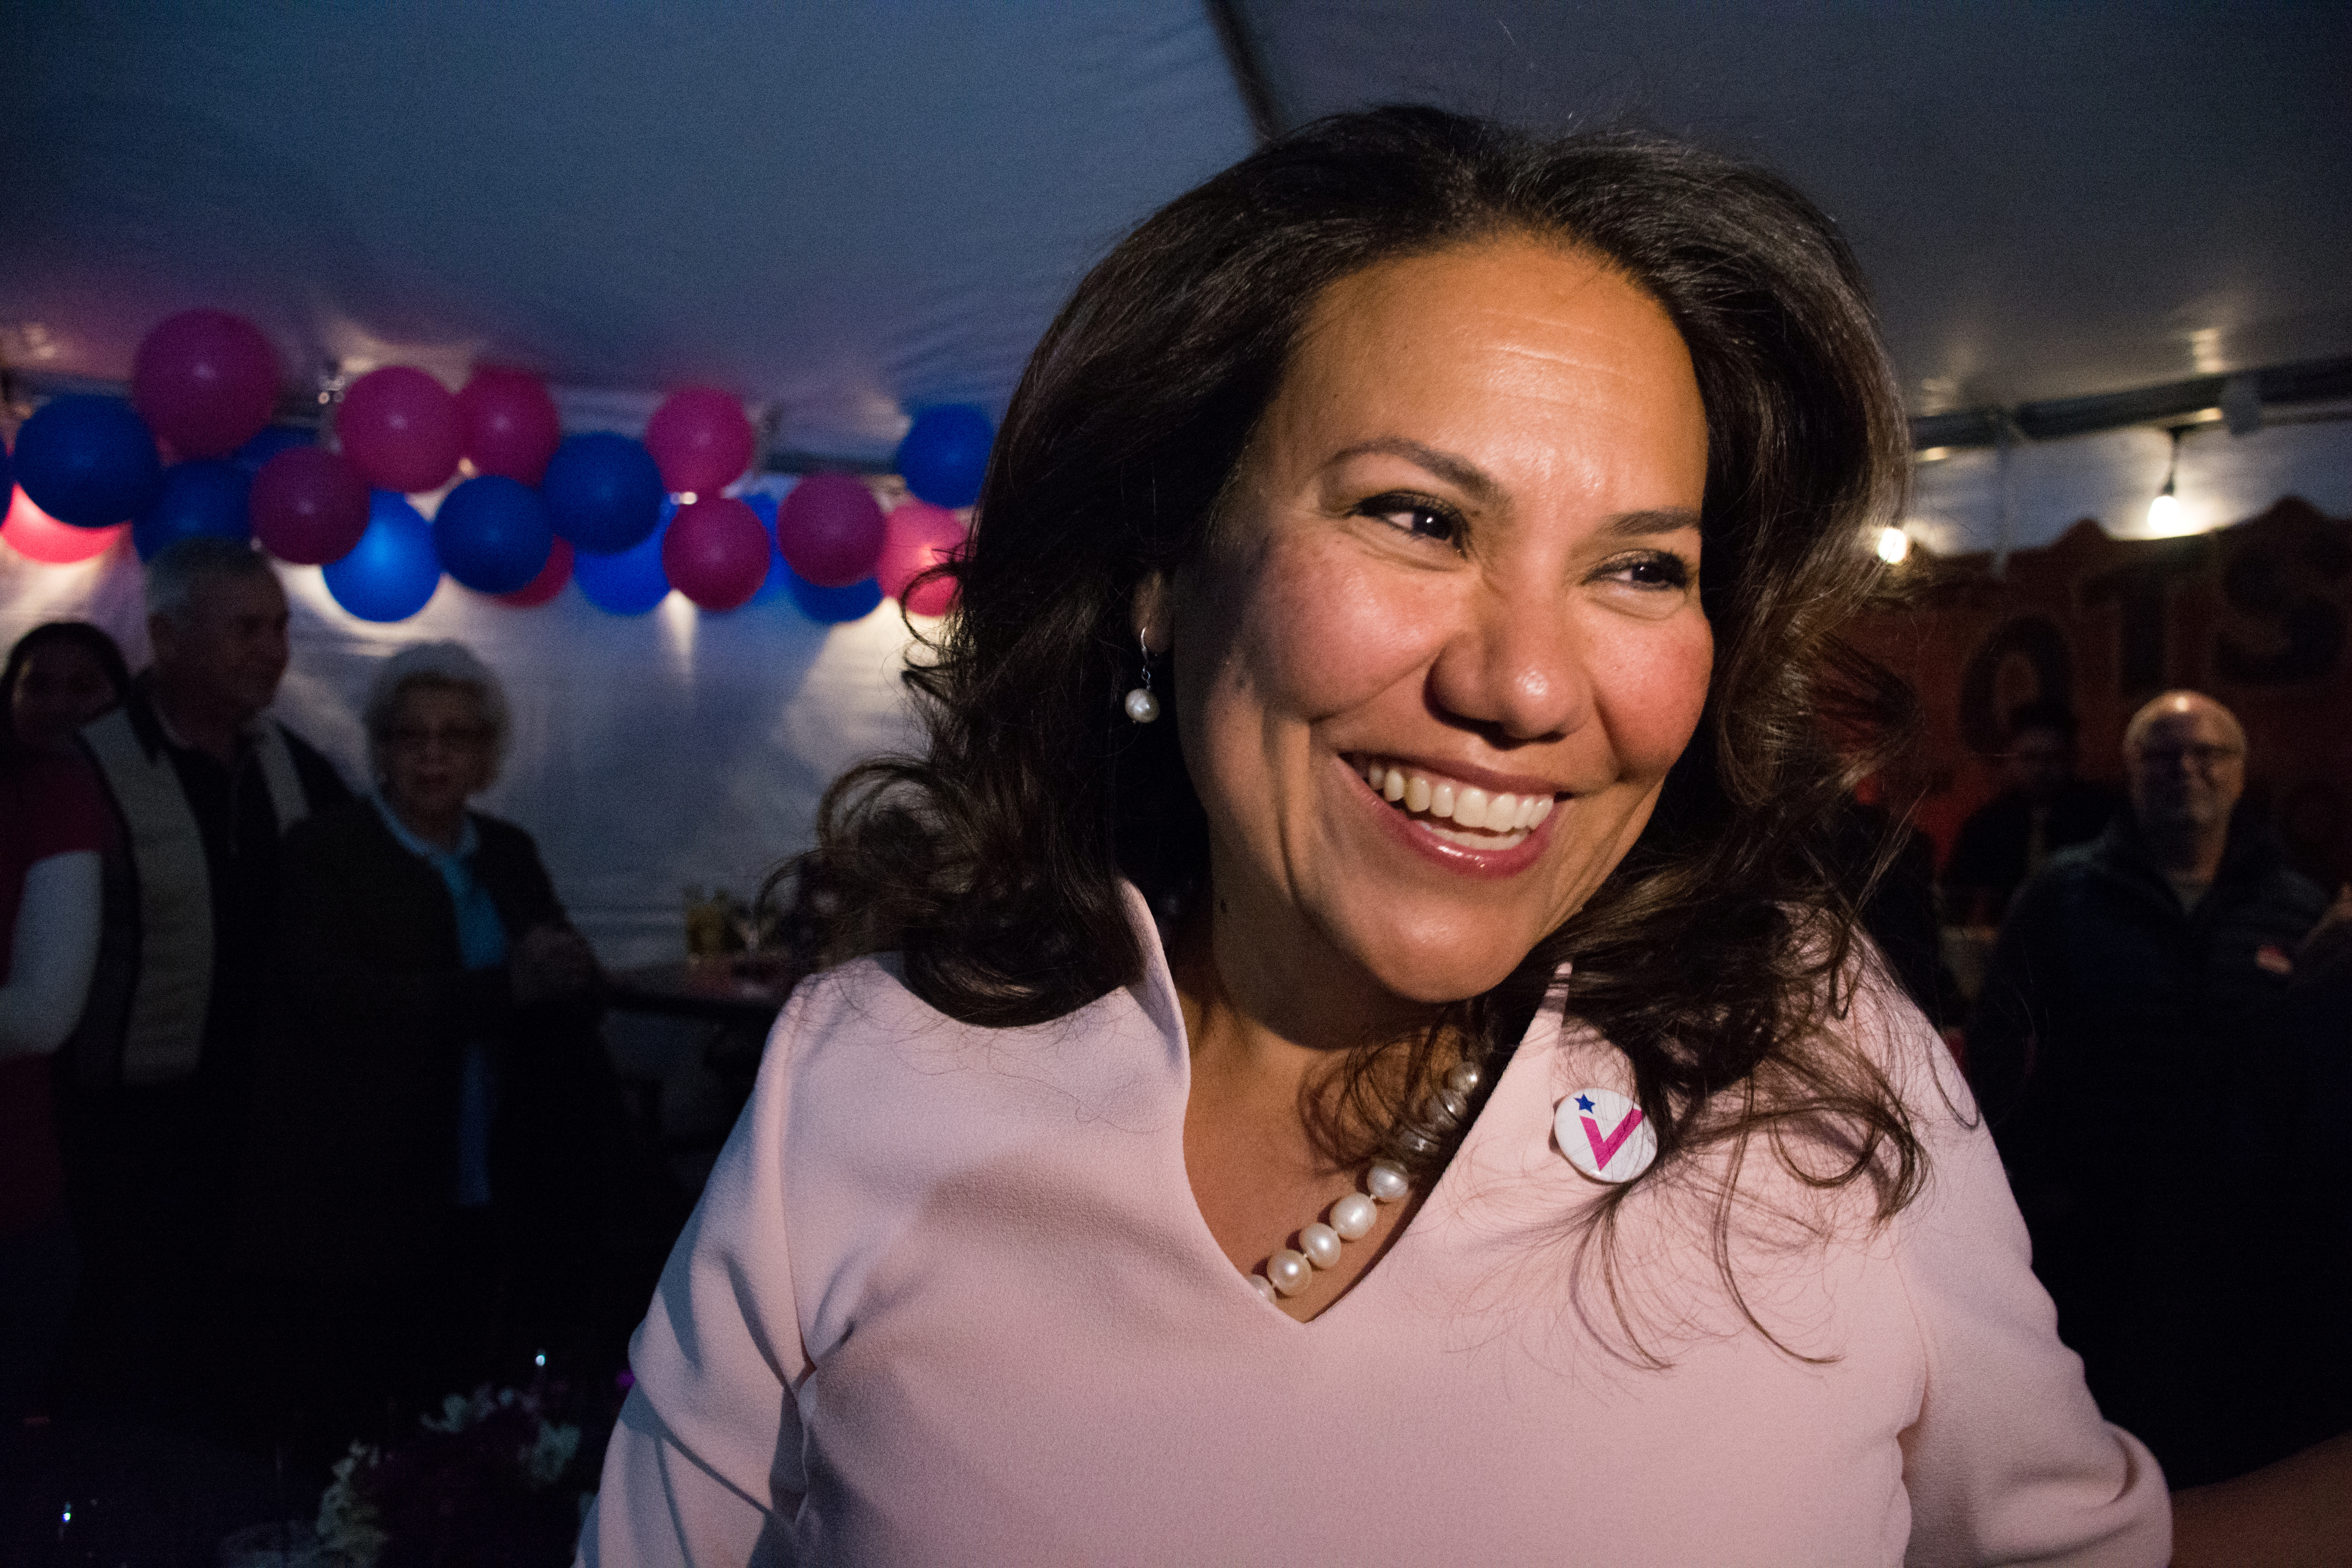 Veronica Escobar smiles and looks to the right